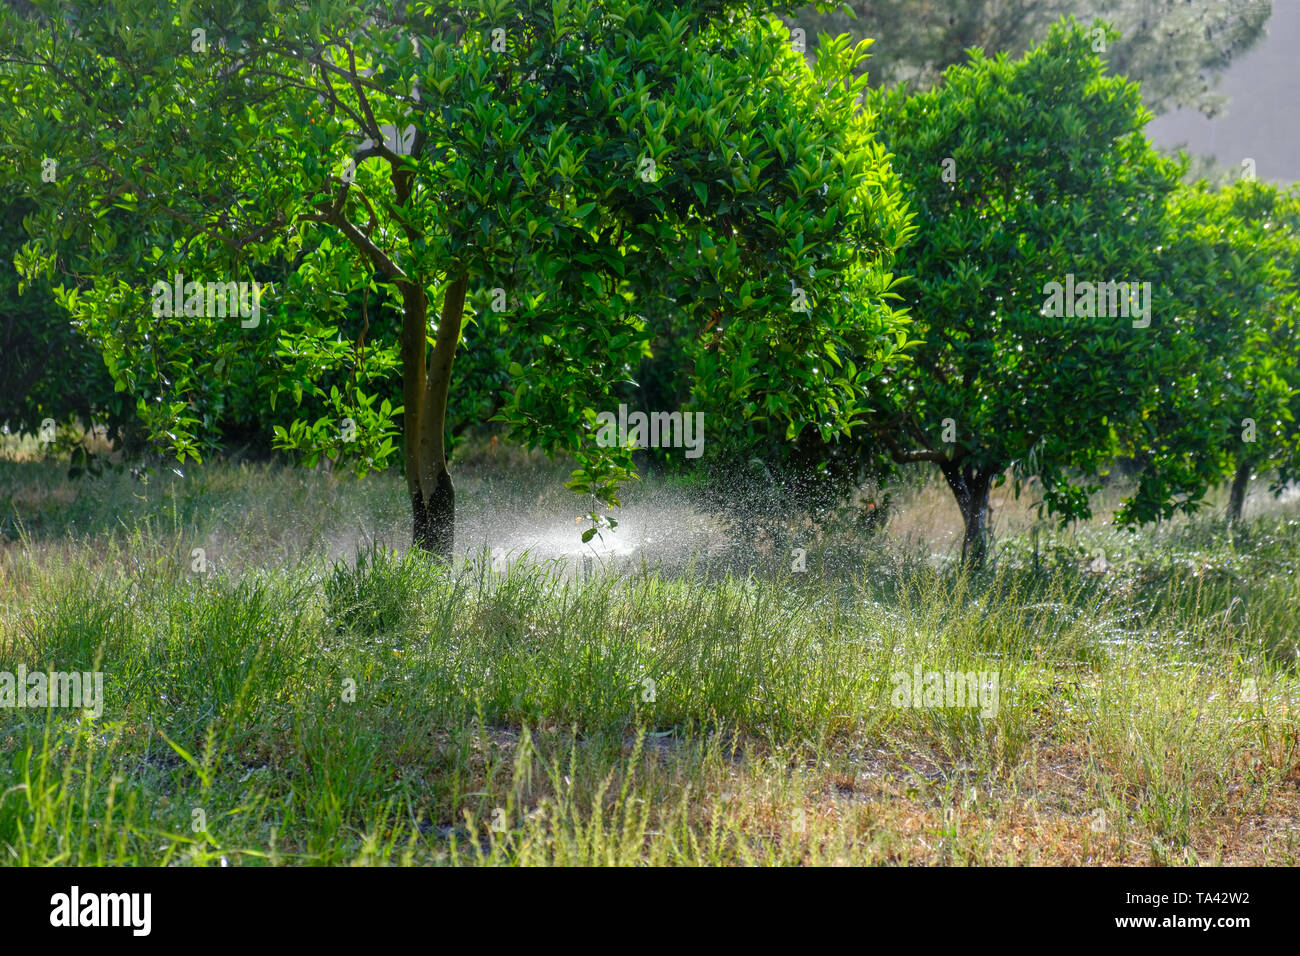 Irrigation system the trees in the orange garden Stock Photo